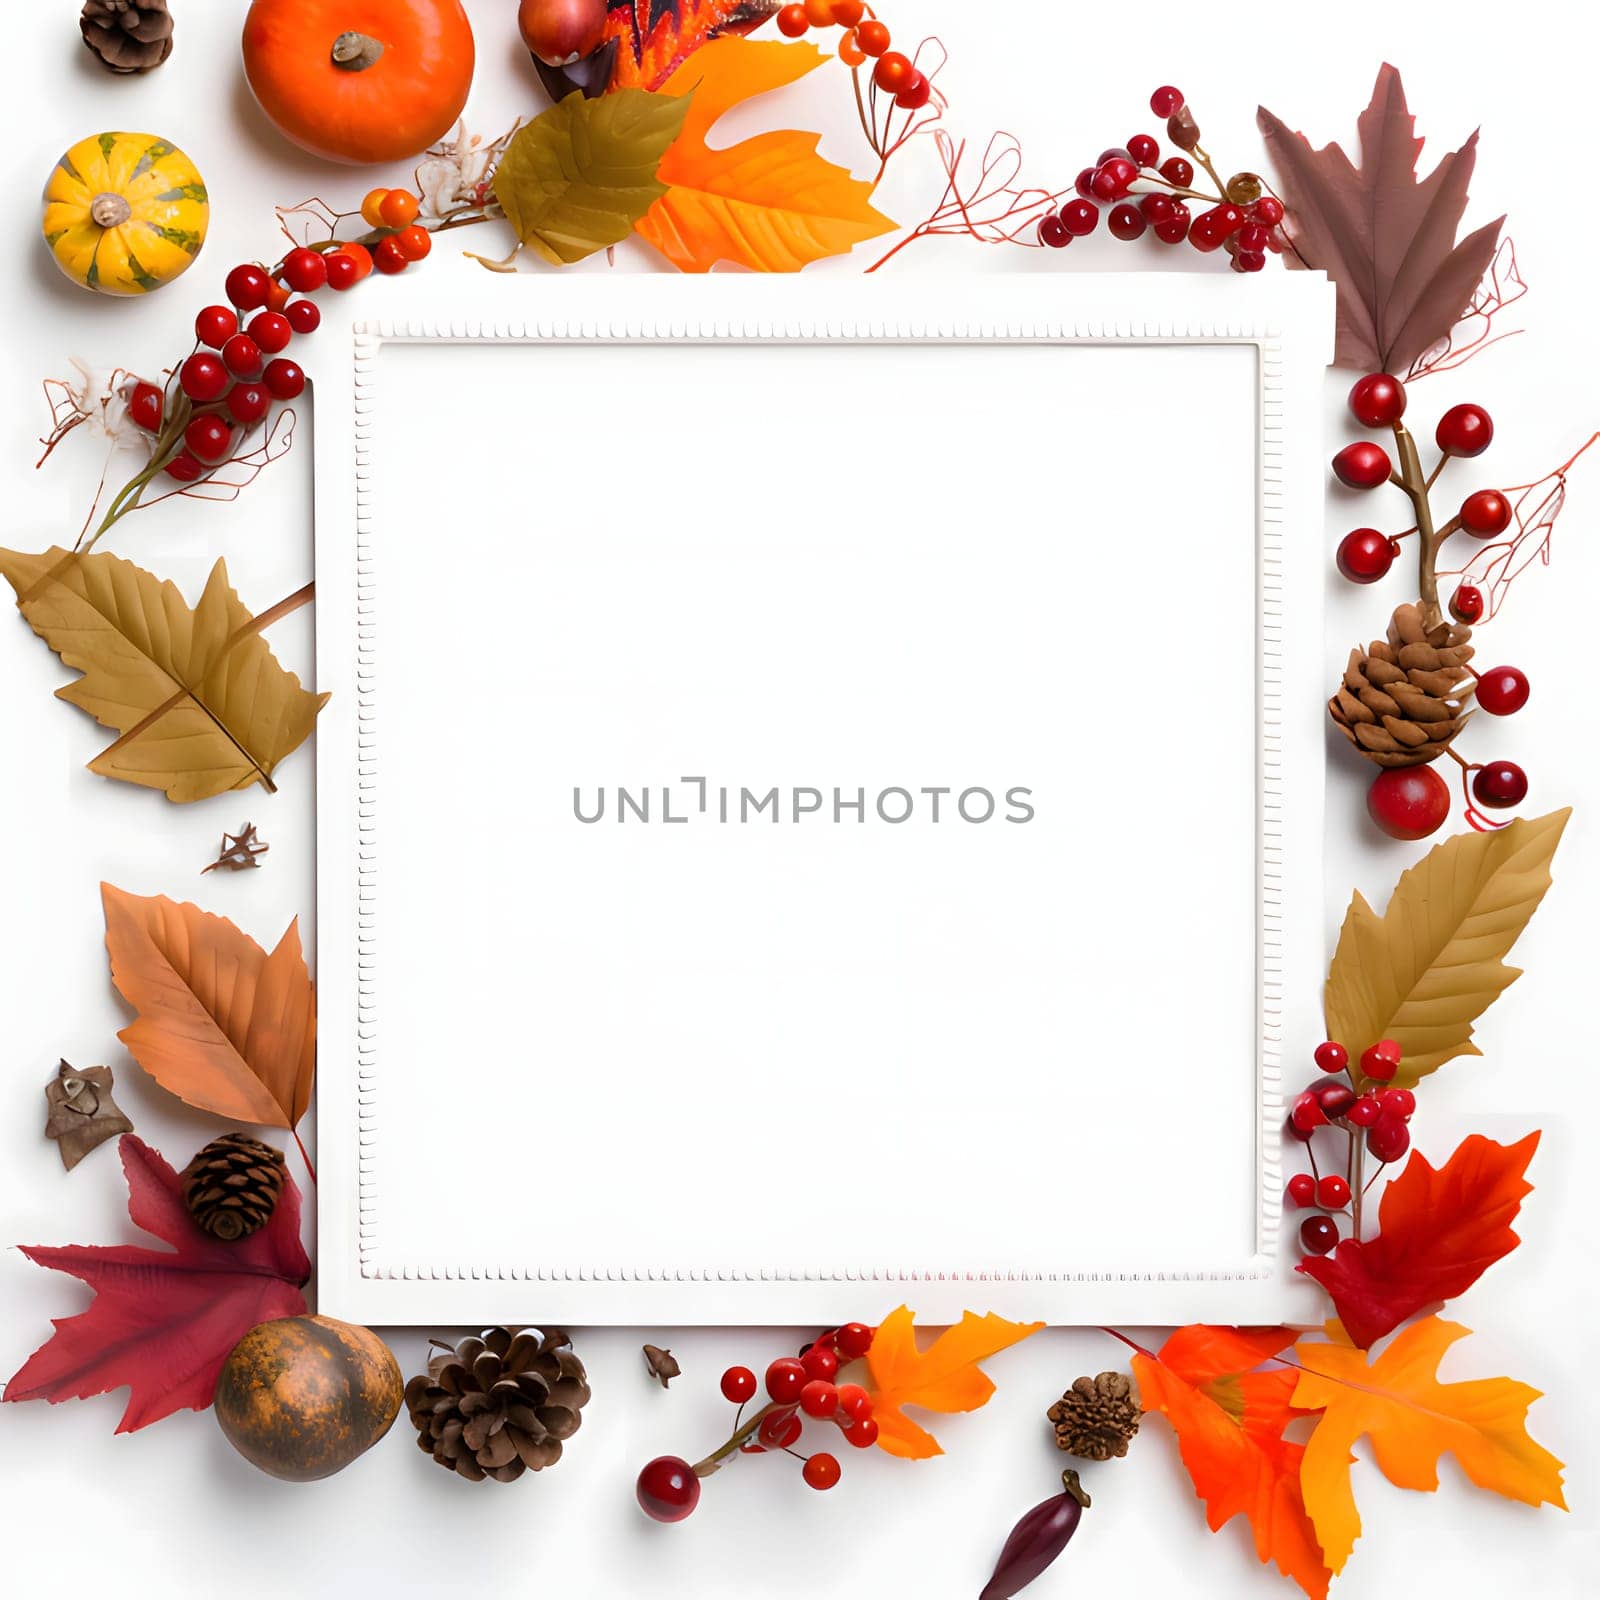 Frame with leaves, harvest and pumpkins on a white background. by ThemesS